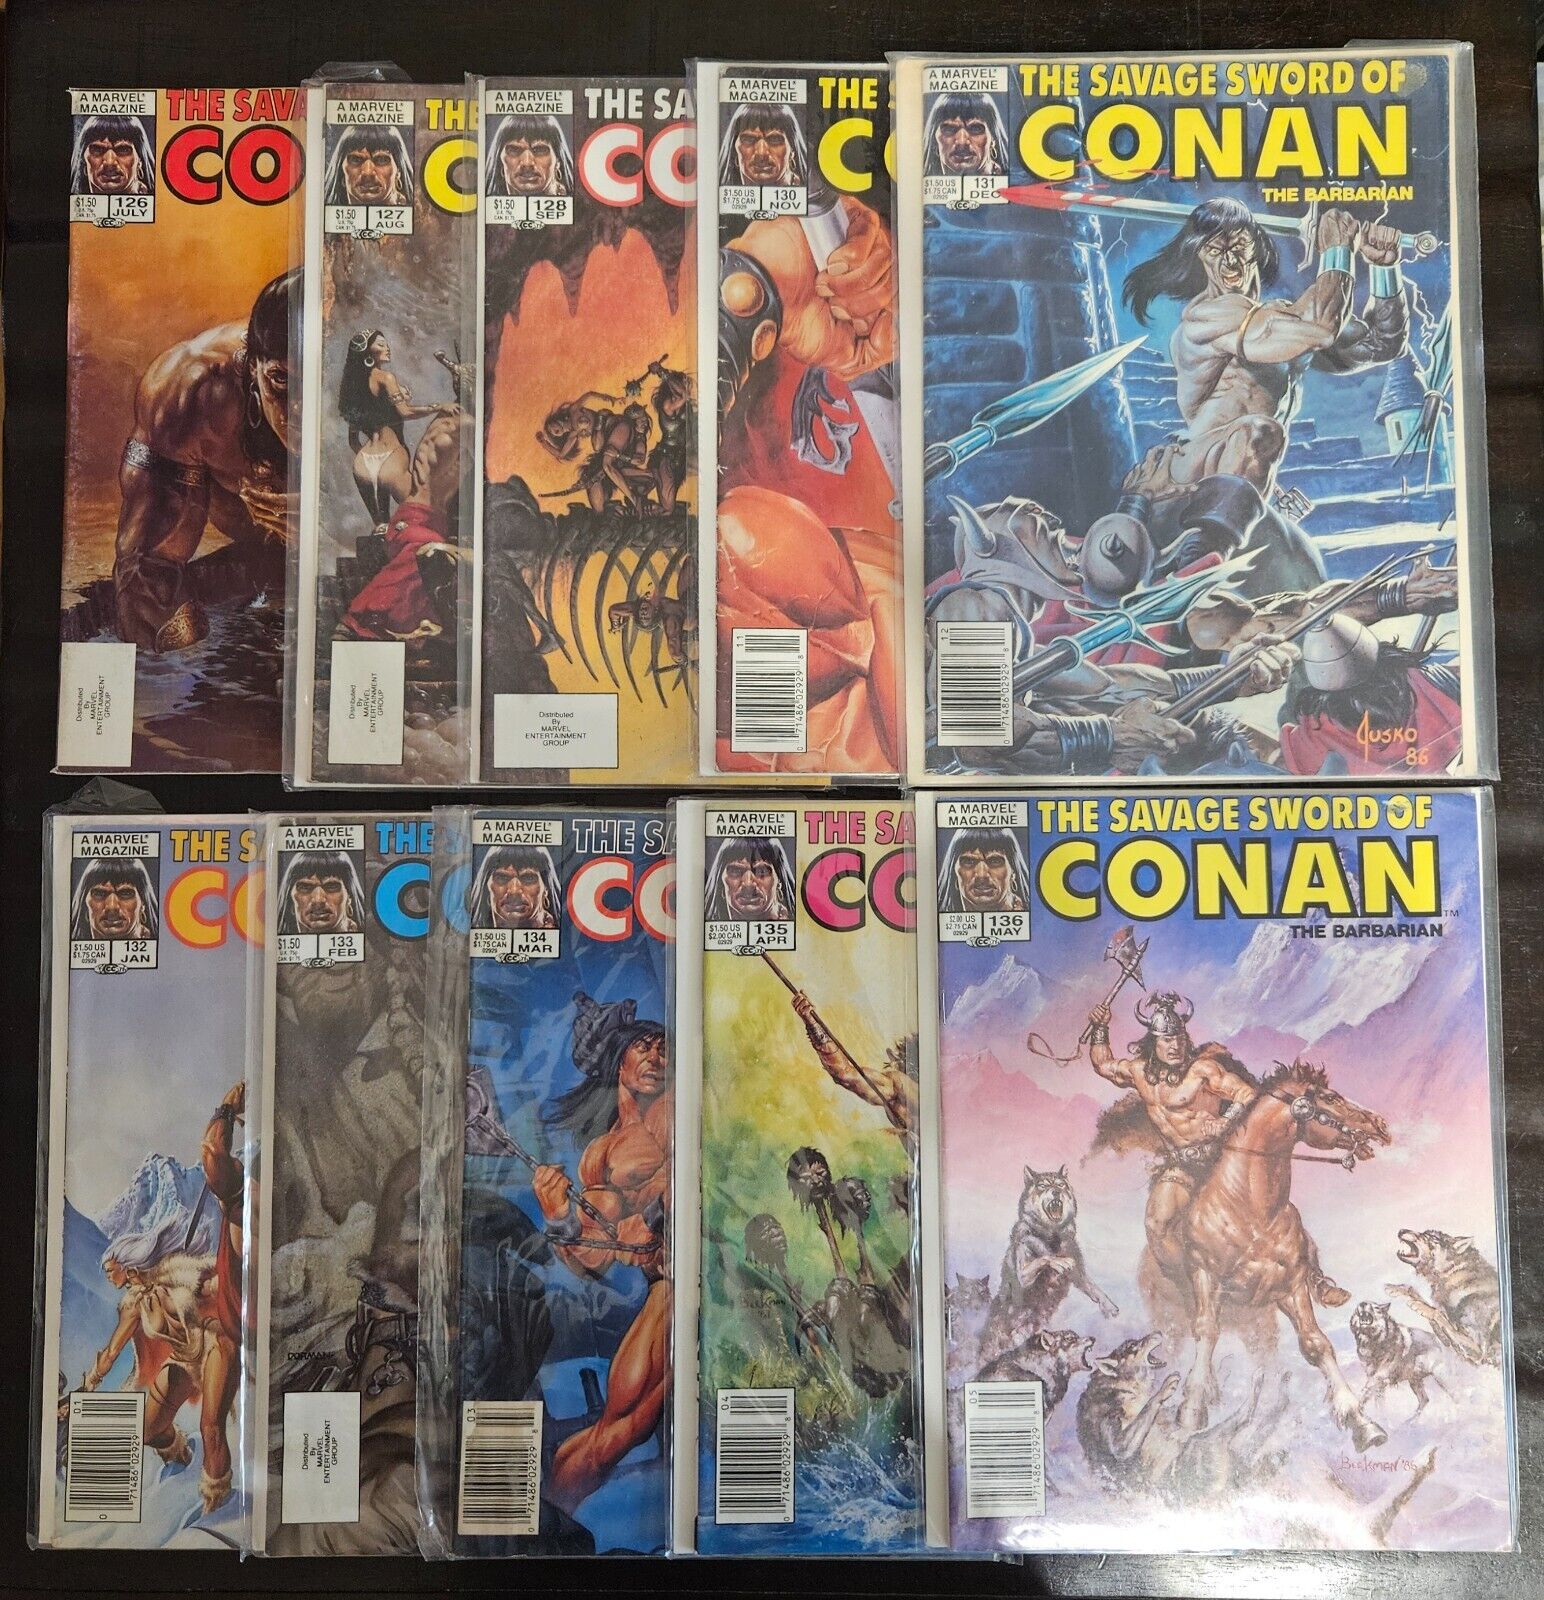 LOT of 10x SAVAGE SWORD OF CONAN THE BARBARIAN MARVEL MAGAZINE - 80'S COLLECTION